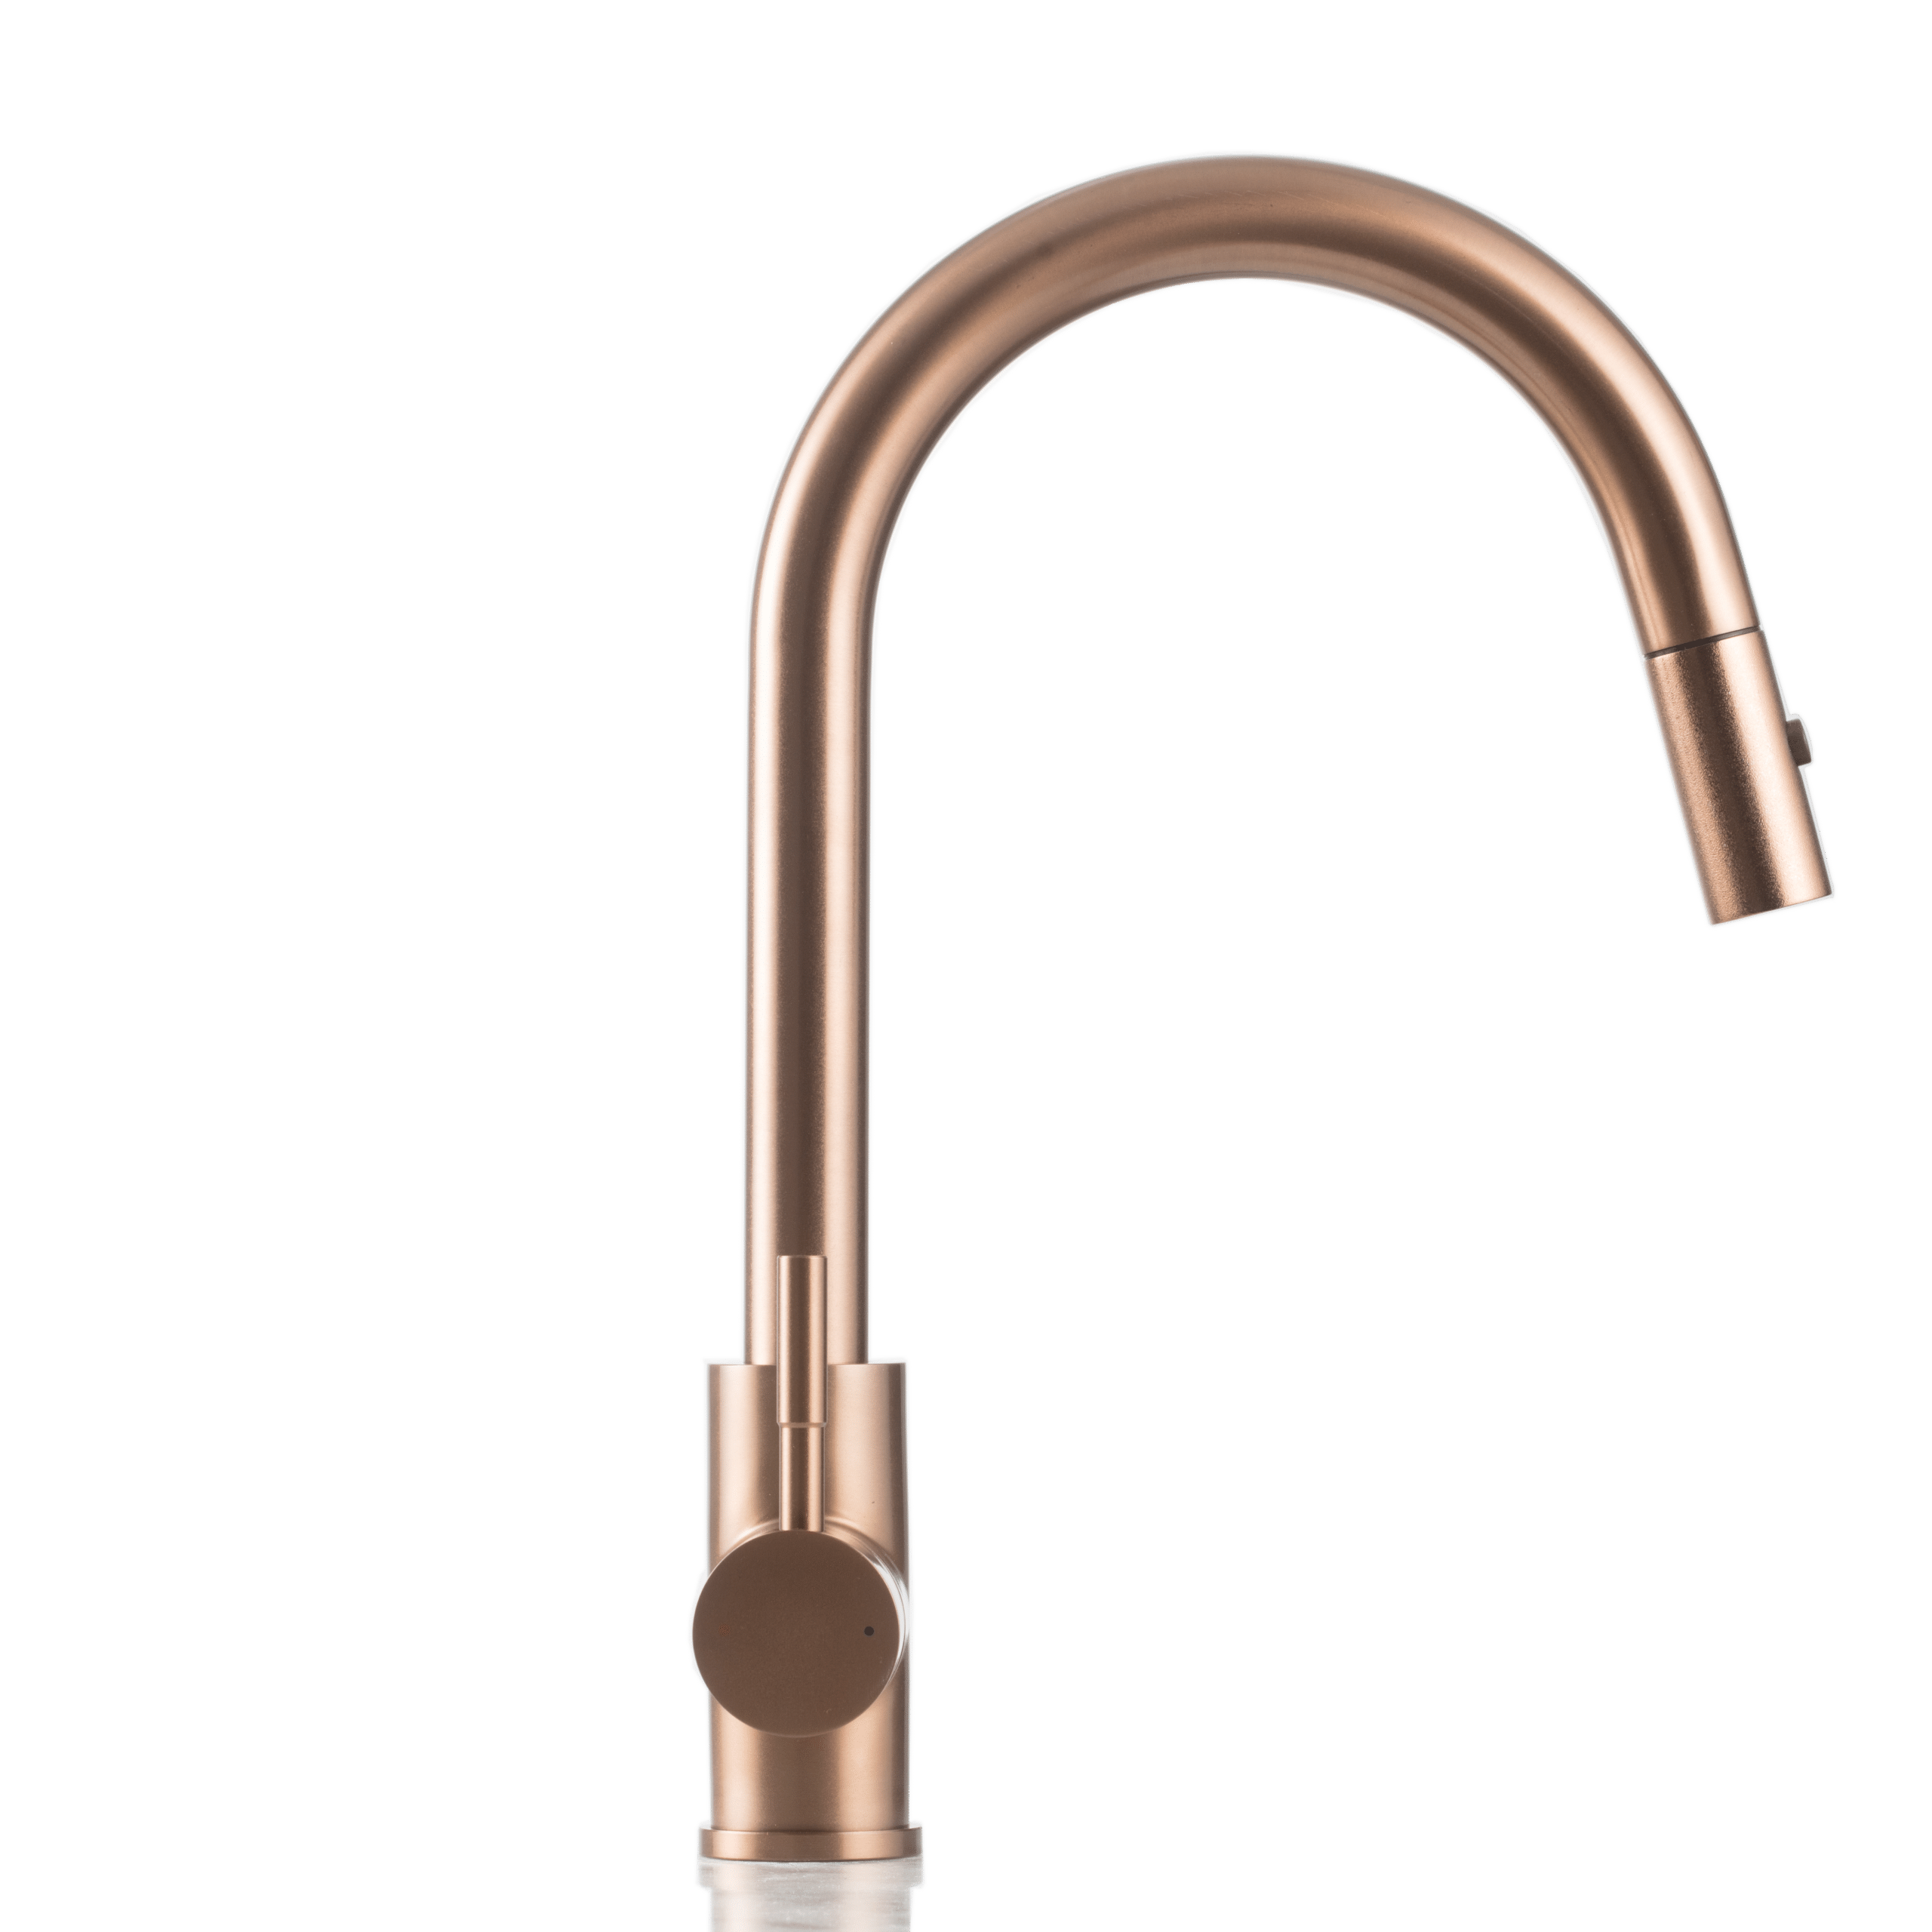 Copper Goose Neck Pull Down Kitchen Faucet Kf1400c Strictly Kitchen And Bath